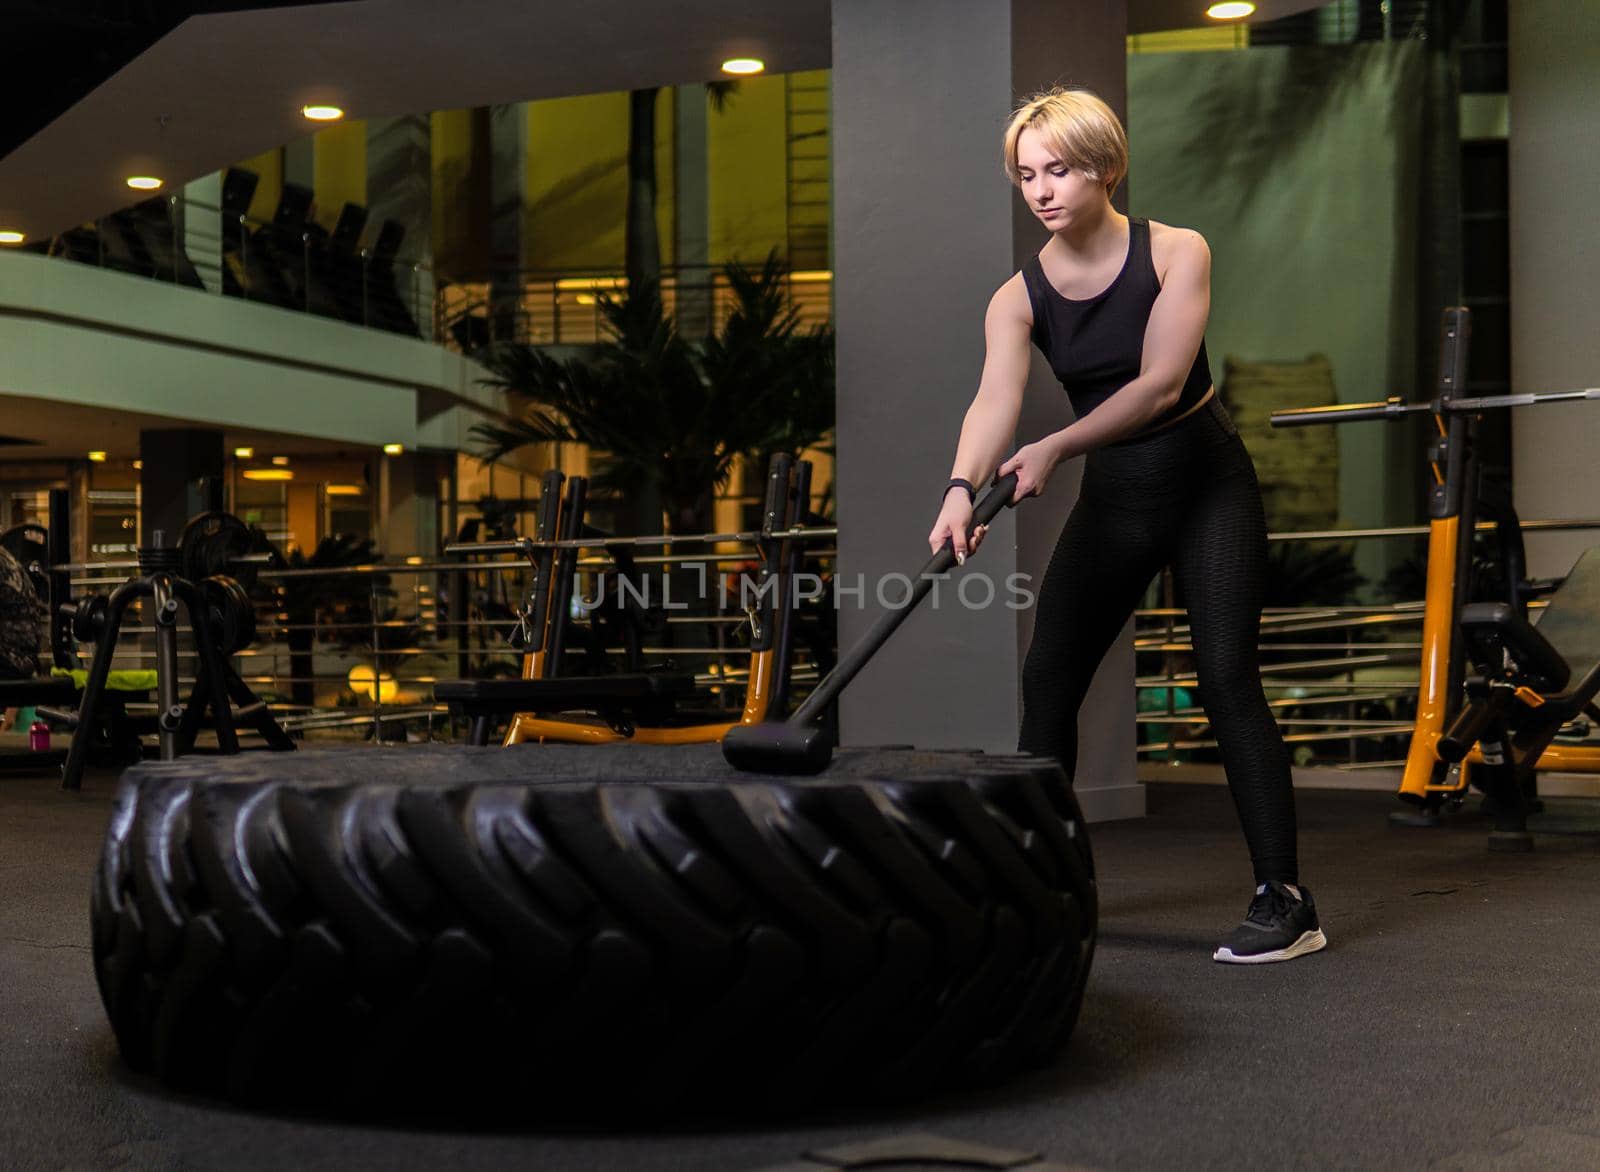 Wheel with sledgehammer girl stands tire active exercise, for sport strong in body young lifestyle, urning leaning. Posing woman lights, rest